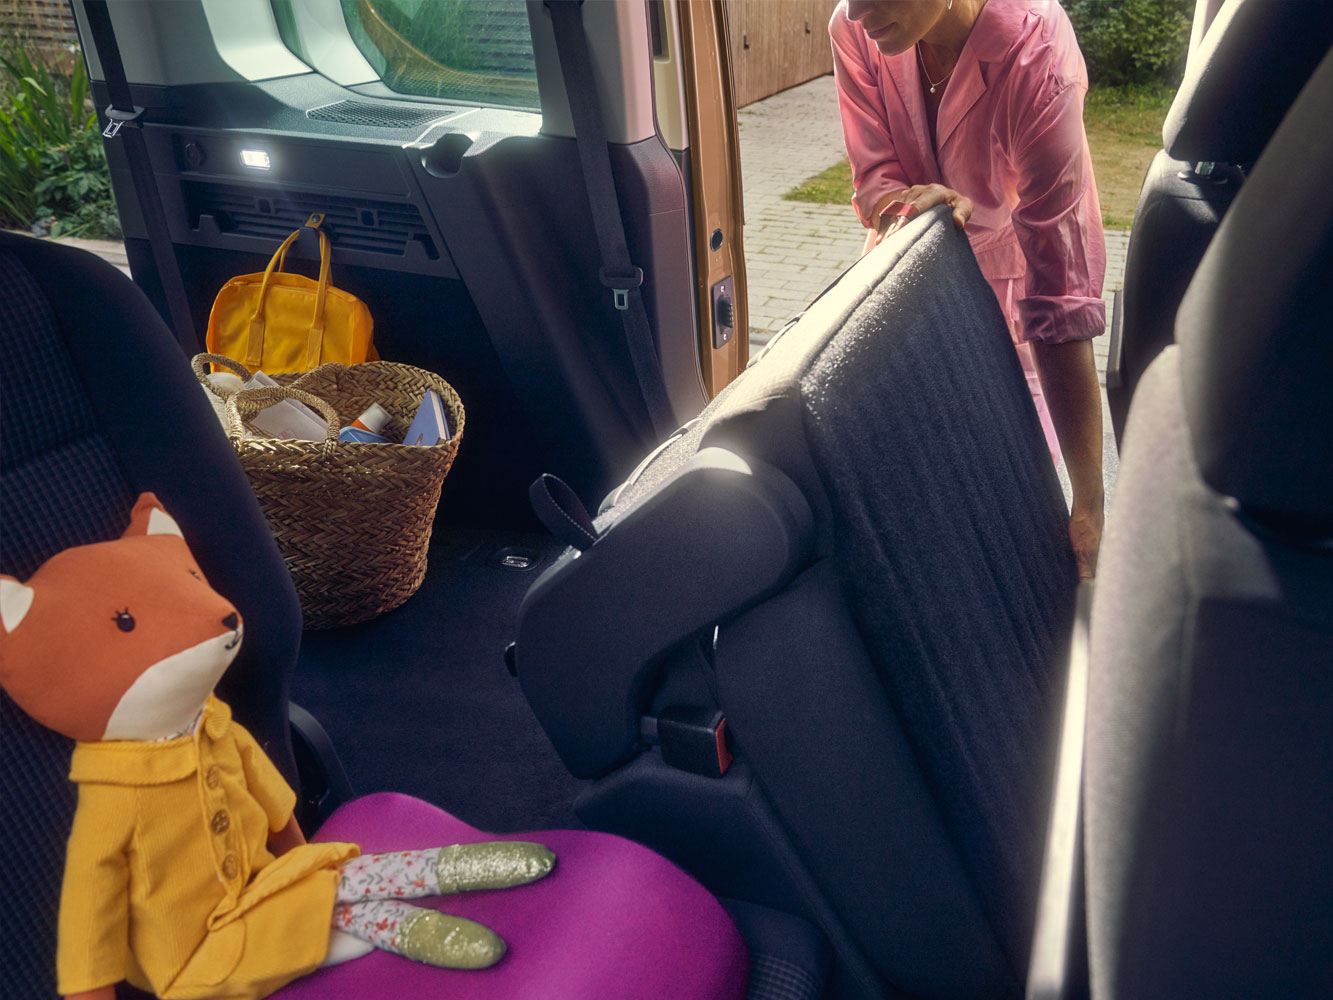 caddy-cargo-van-interior-being-loaded-by-woman